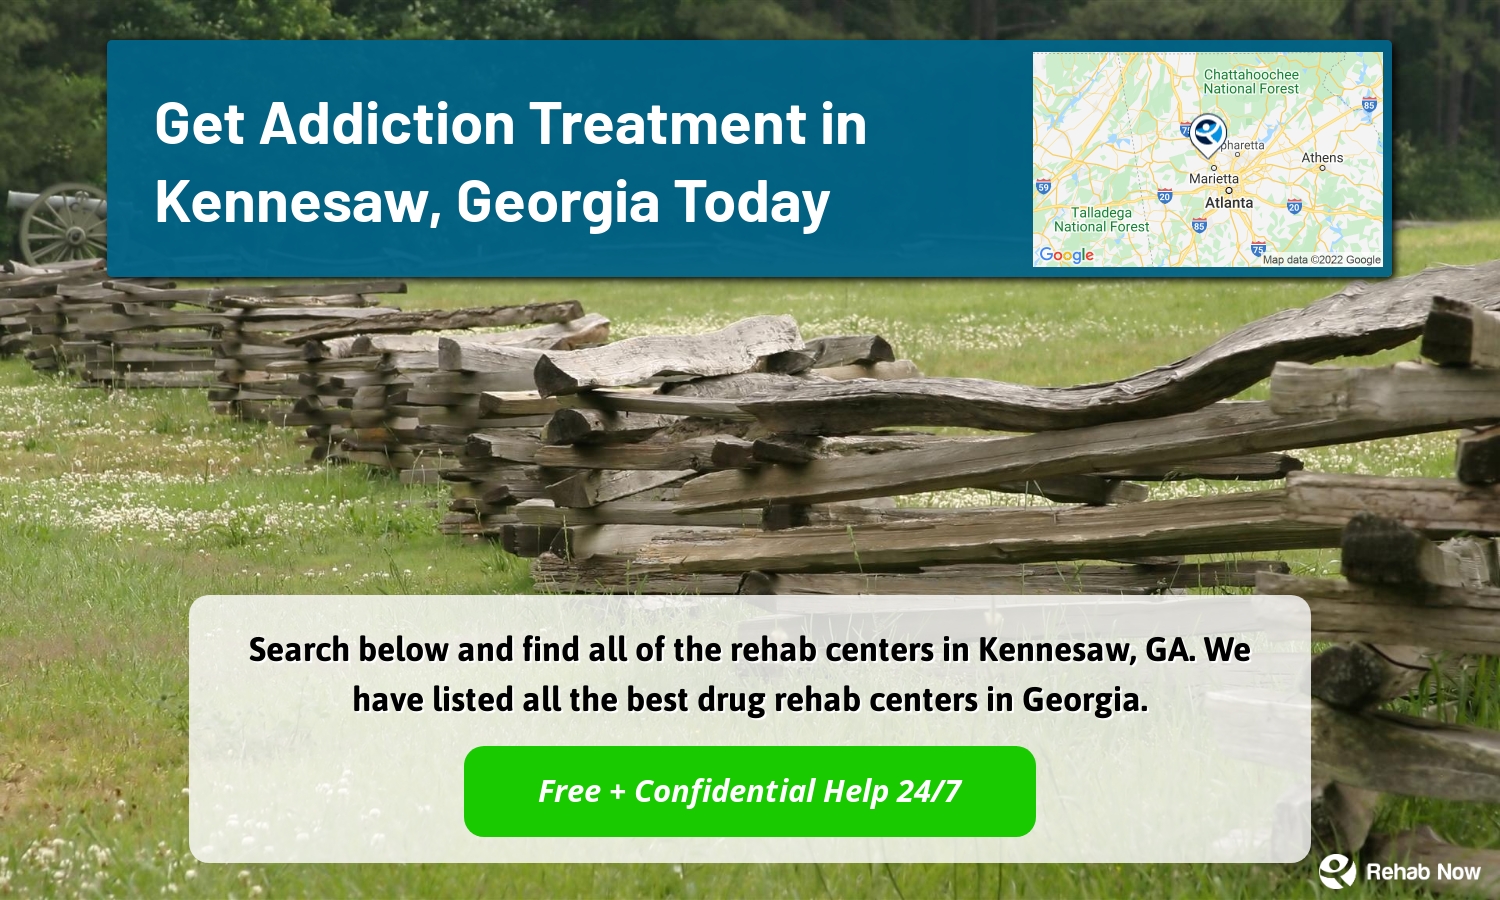 Search below and find all of the rehab centers in Kennesaw, GA. We have listed all the best drug rehab centers in Georgia.